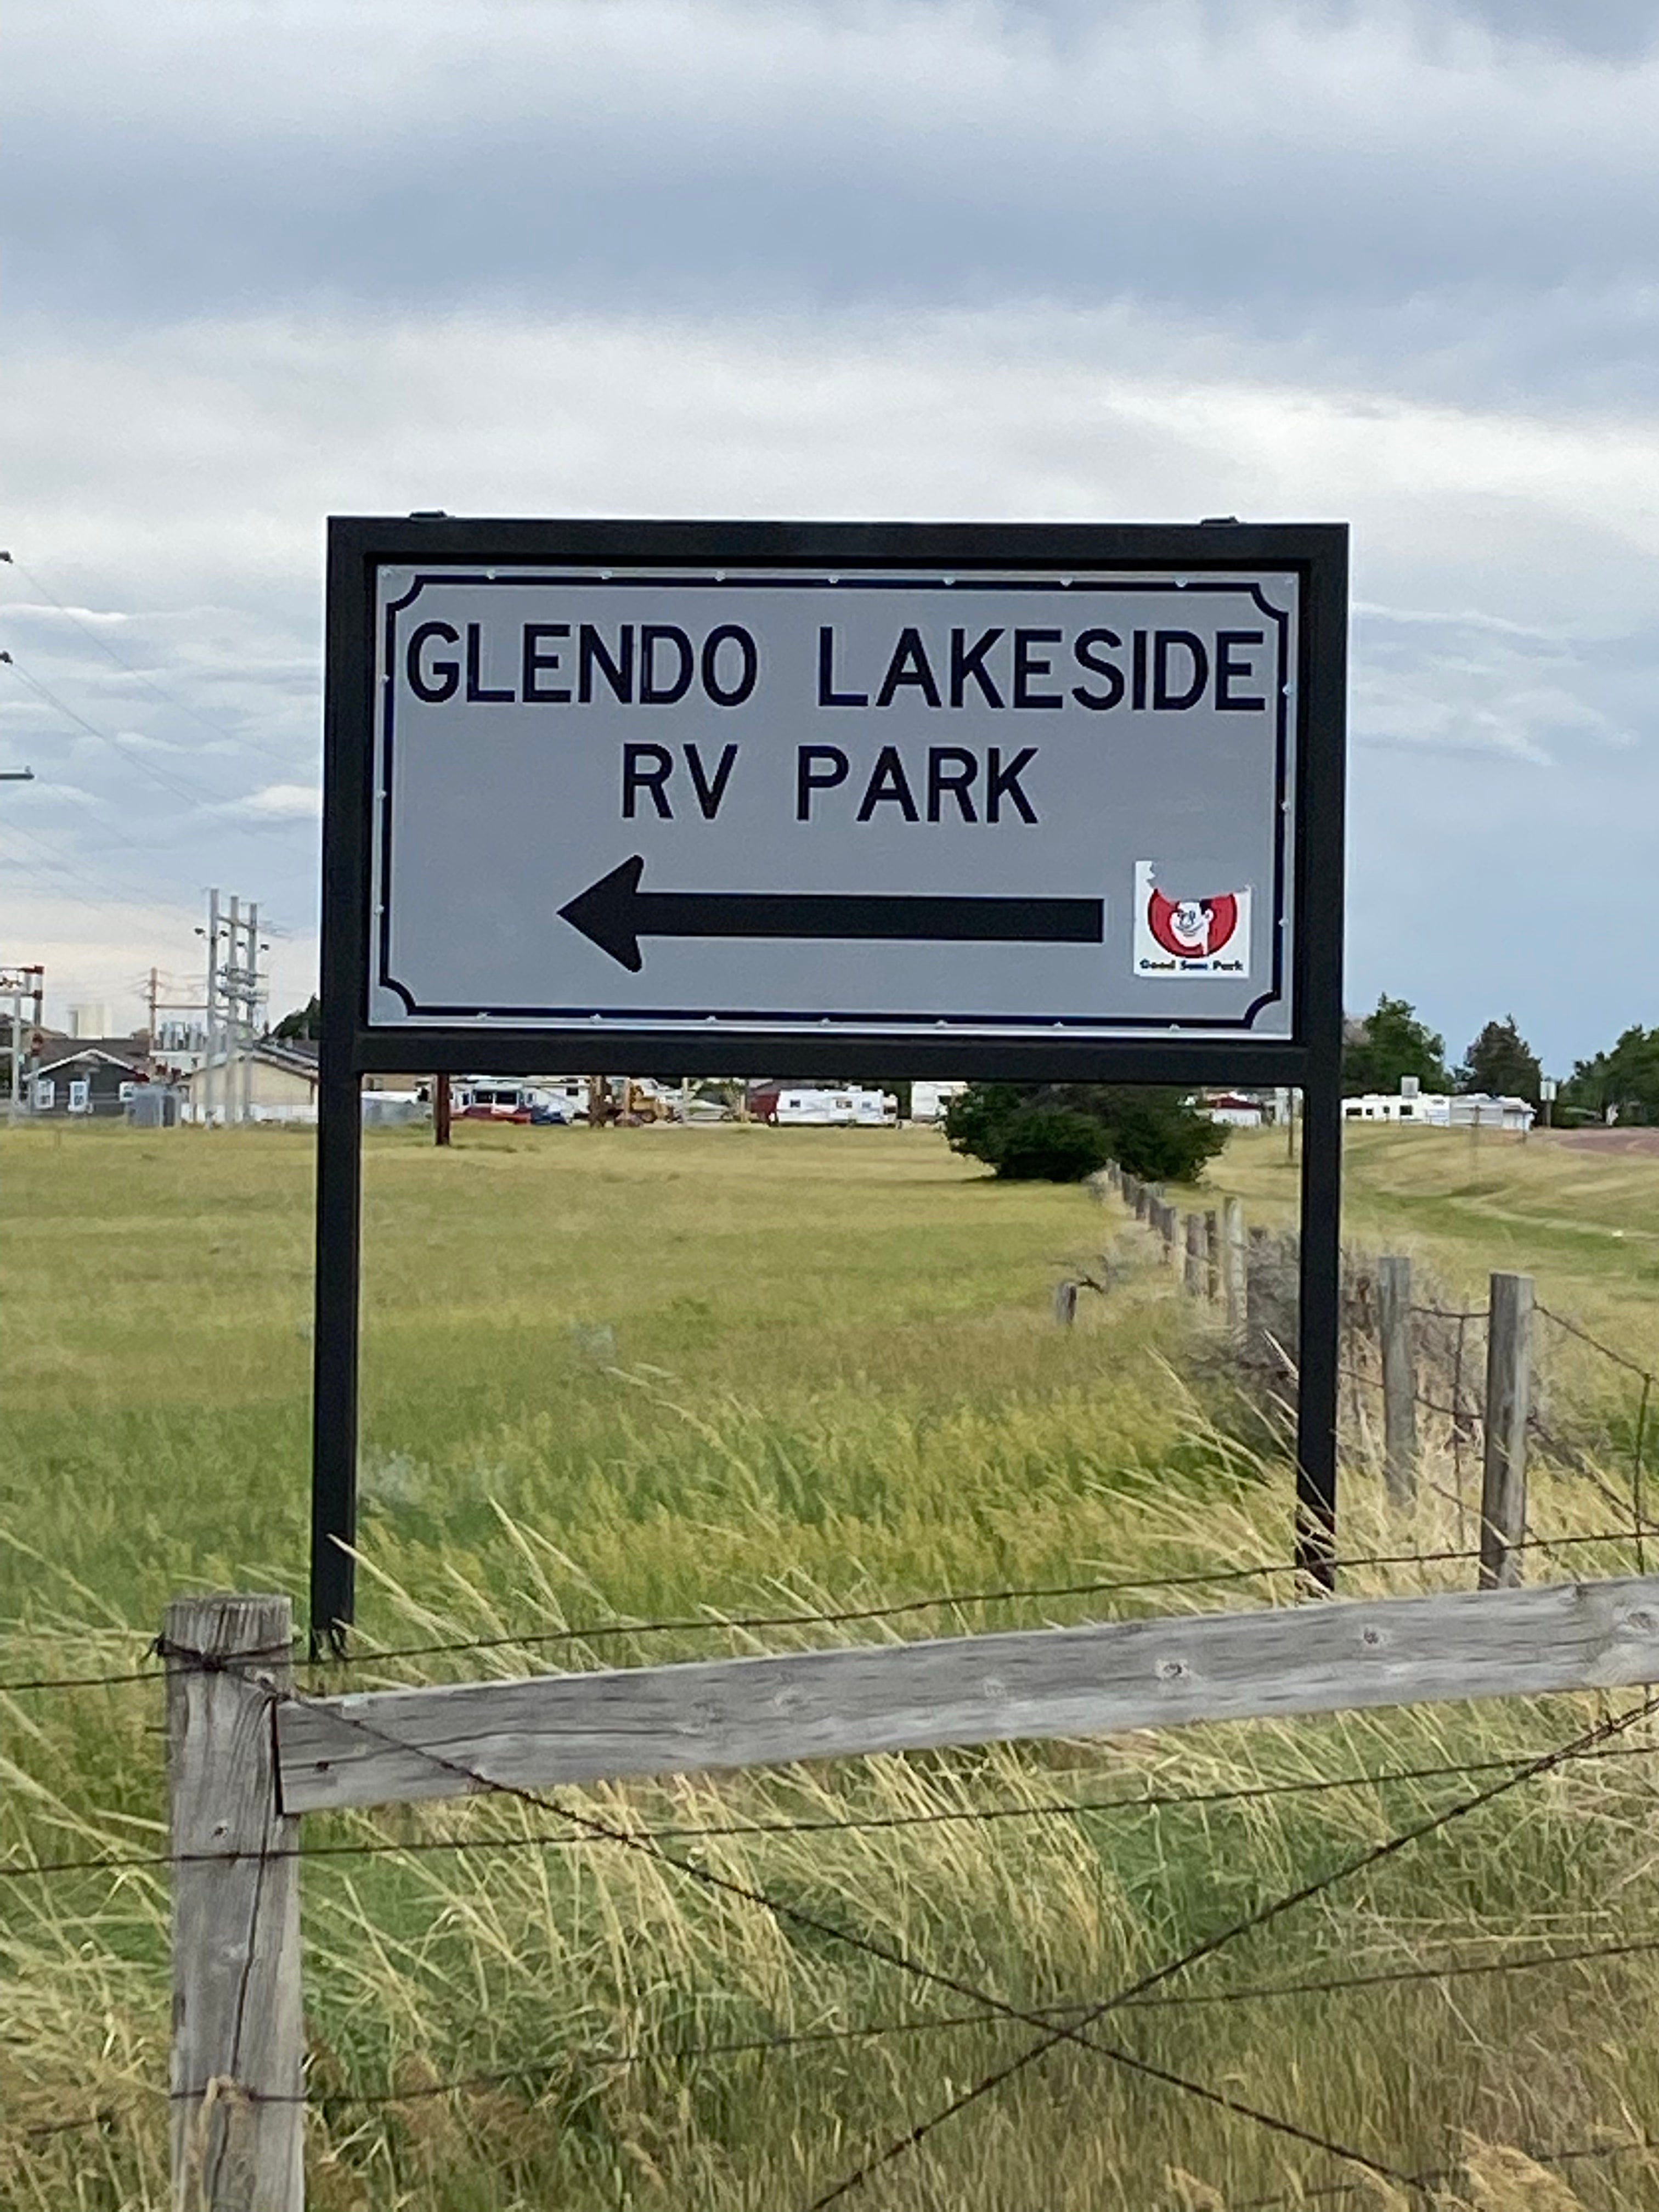 Camper submitted image from Glendo Lakeside RV Park - 3